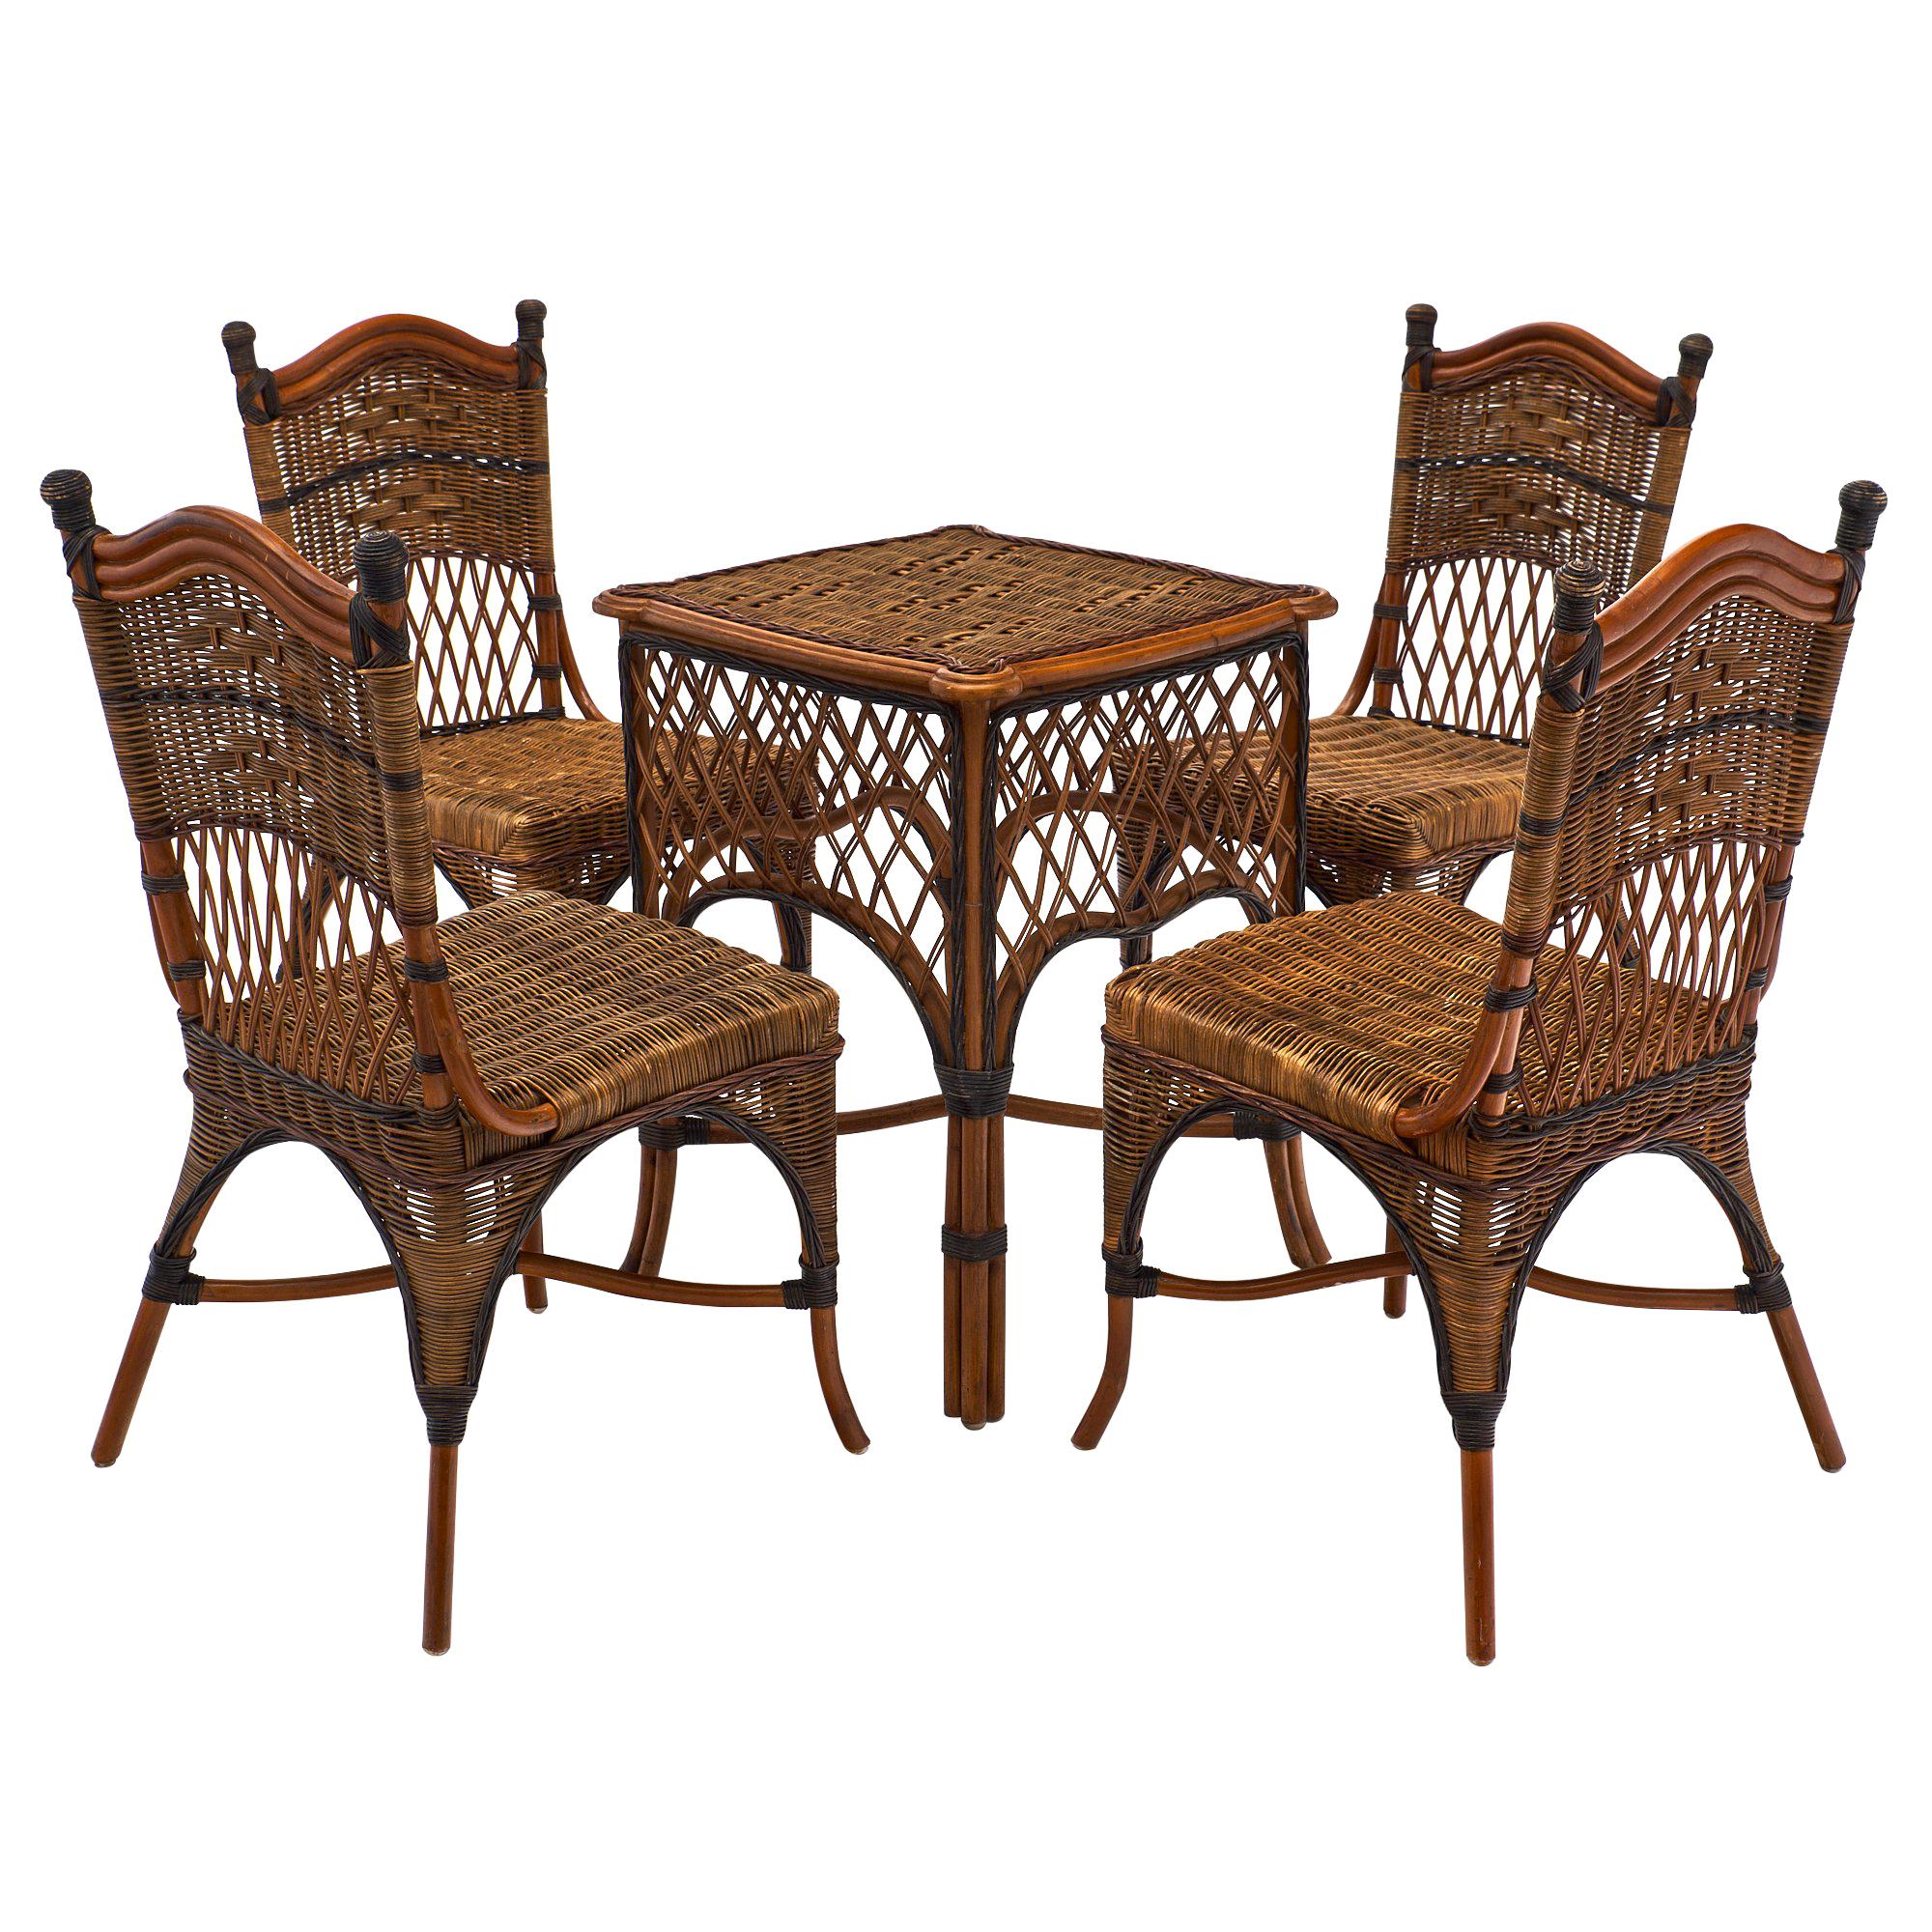 English Set of Wicker Chairs and Table